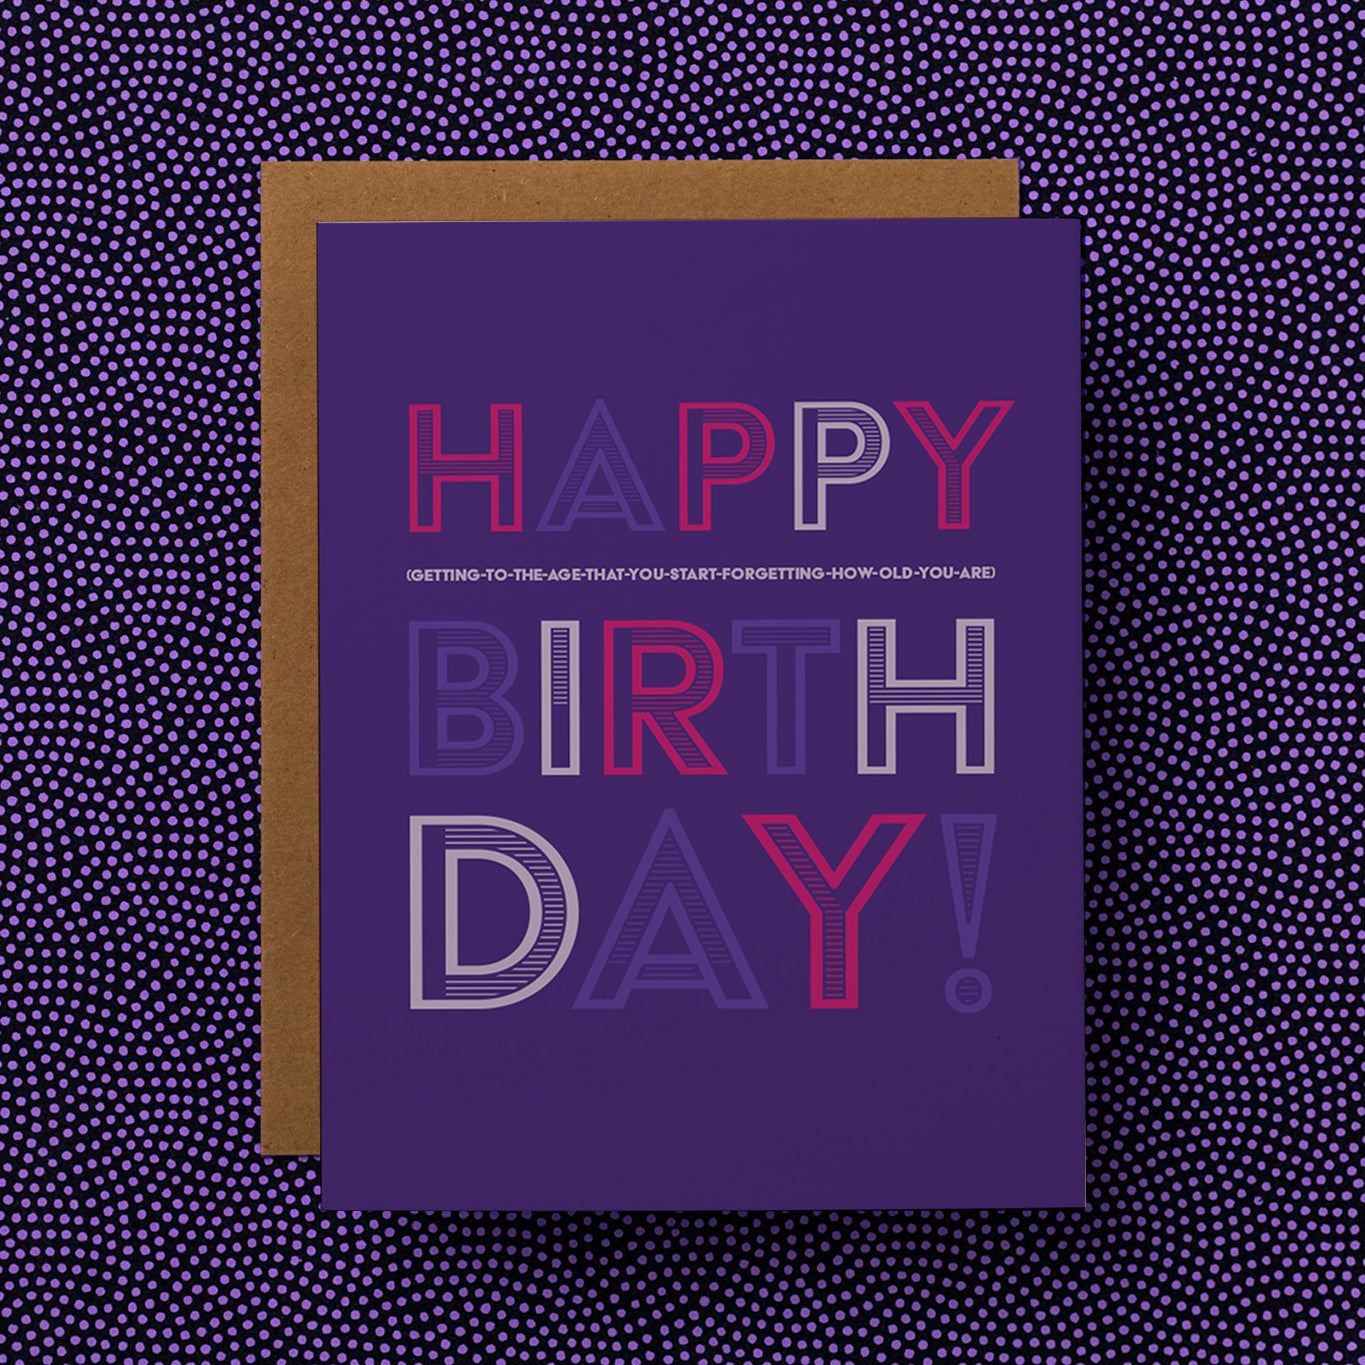 A funny and honest birthday greeting card that reads "Happy (getting-to-that-age-that-you-start-forgetting-how-old-you-are) Birthday